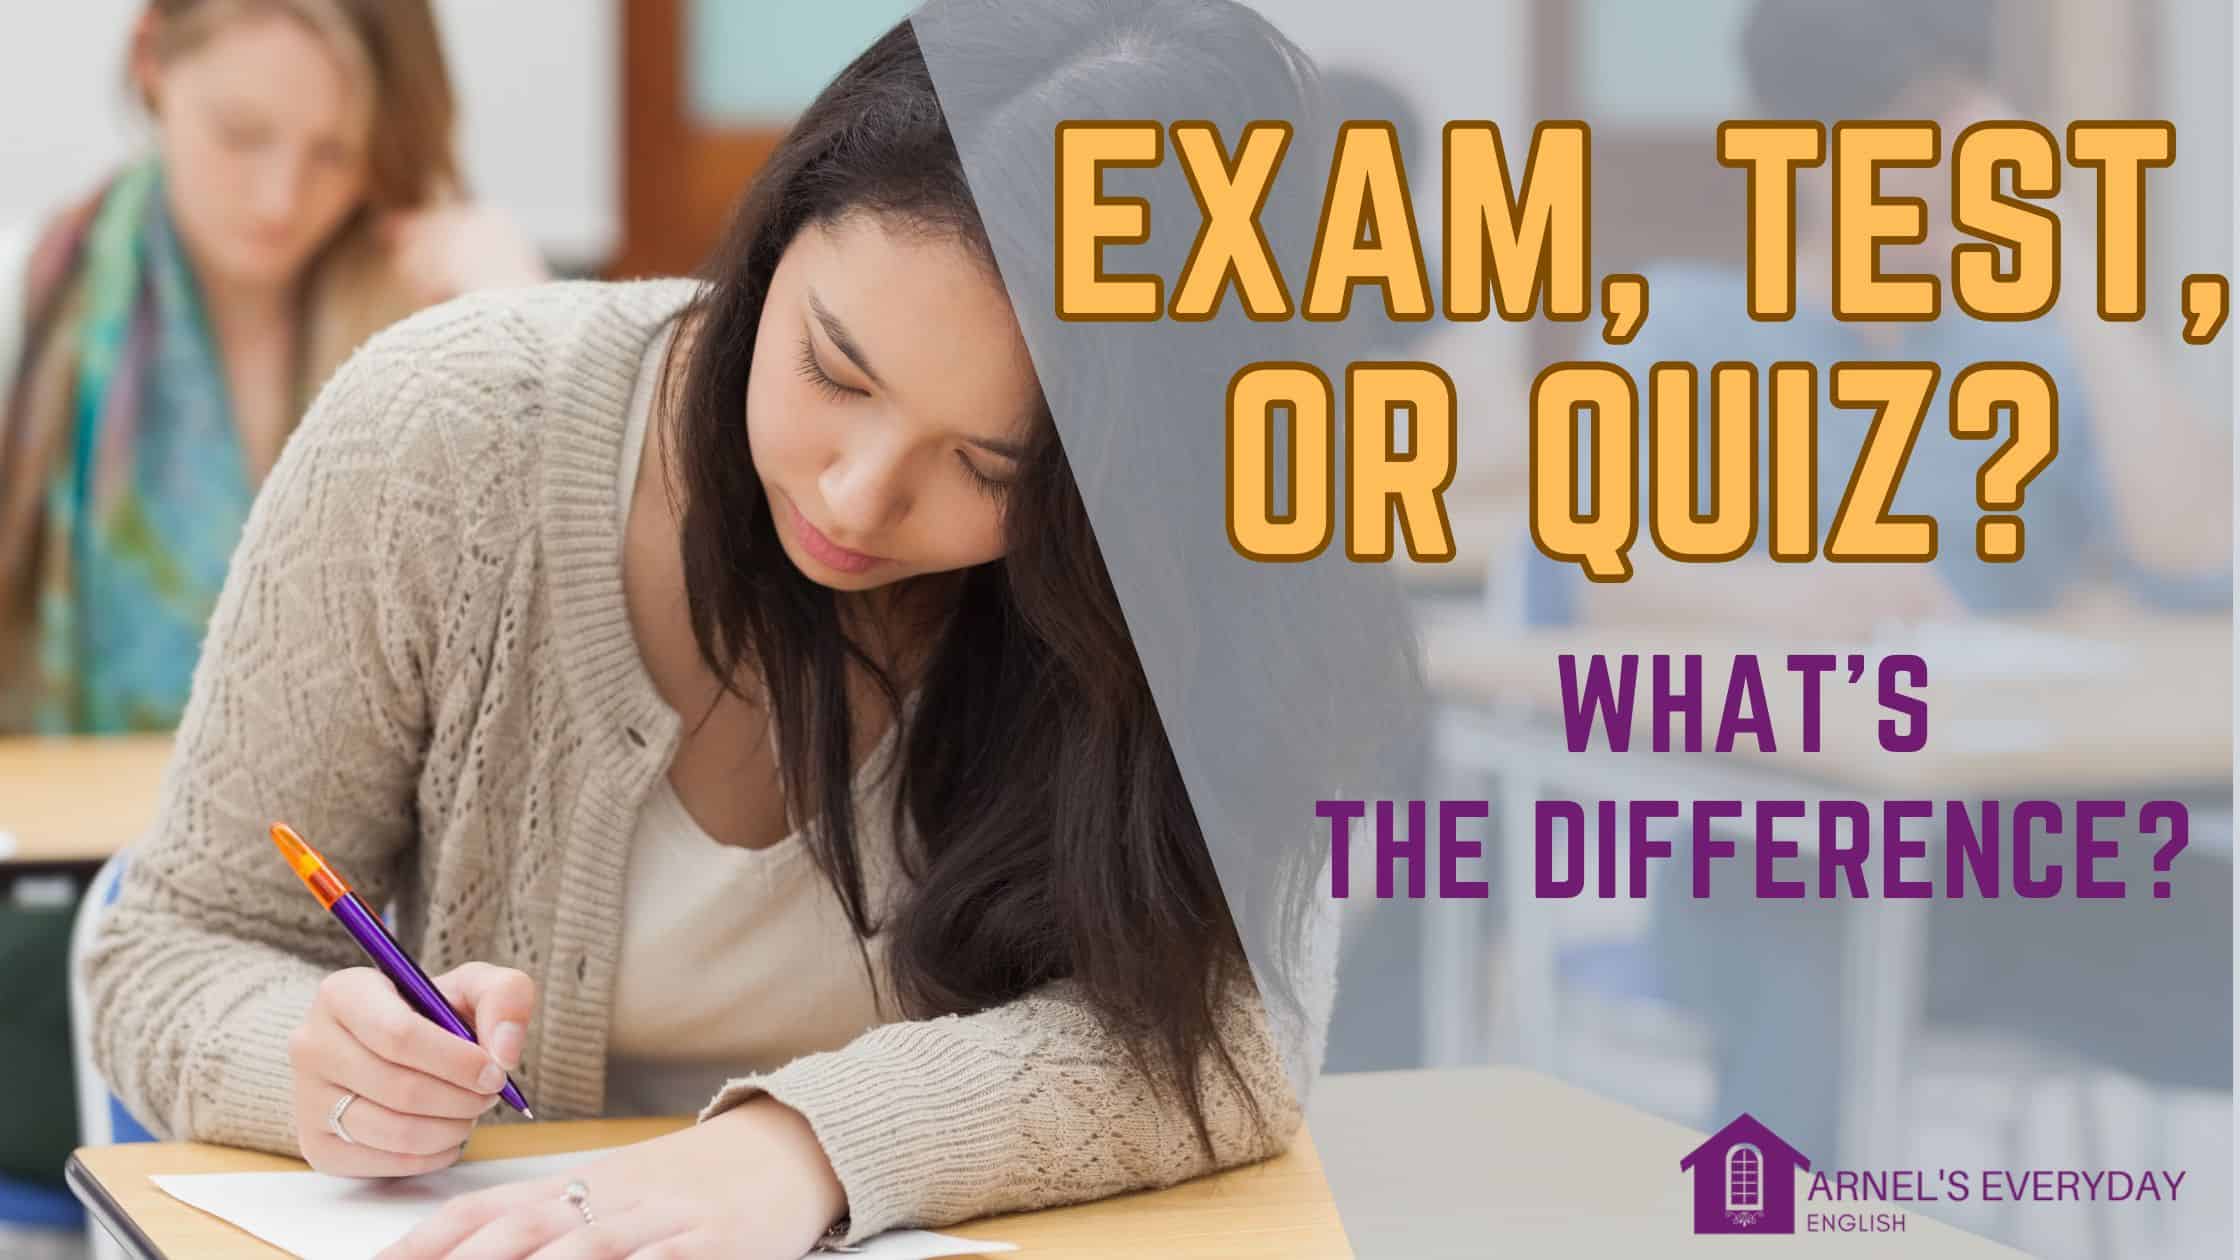 Exam? | Test? | Quiz? – What’s the difference?